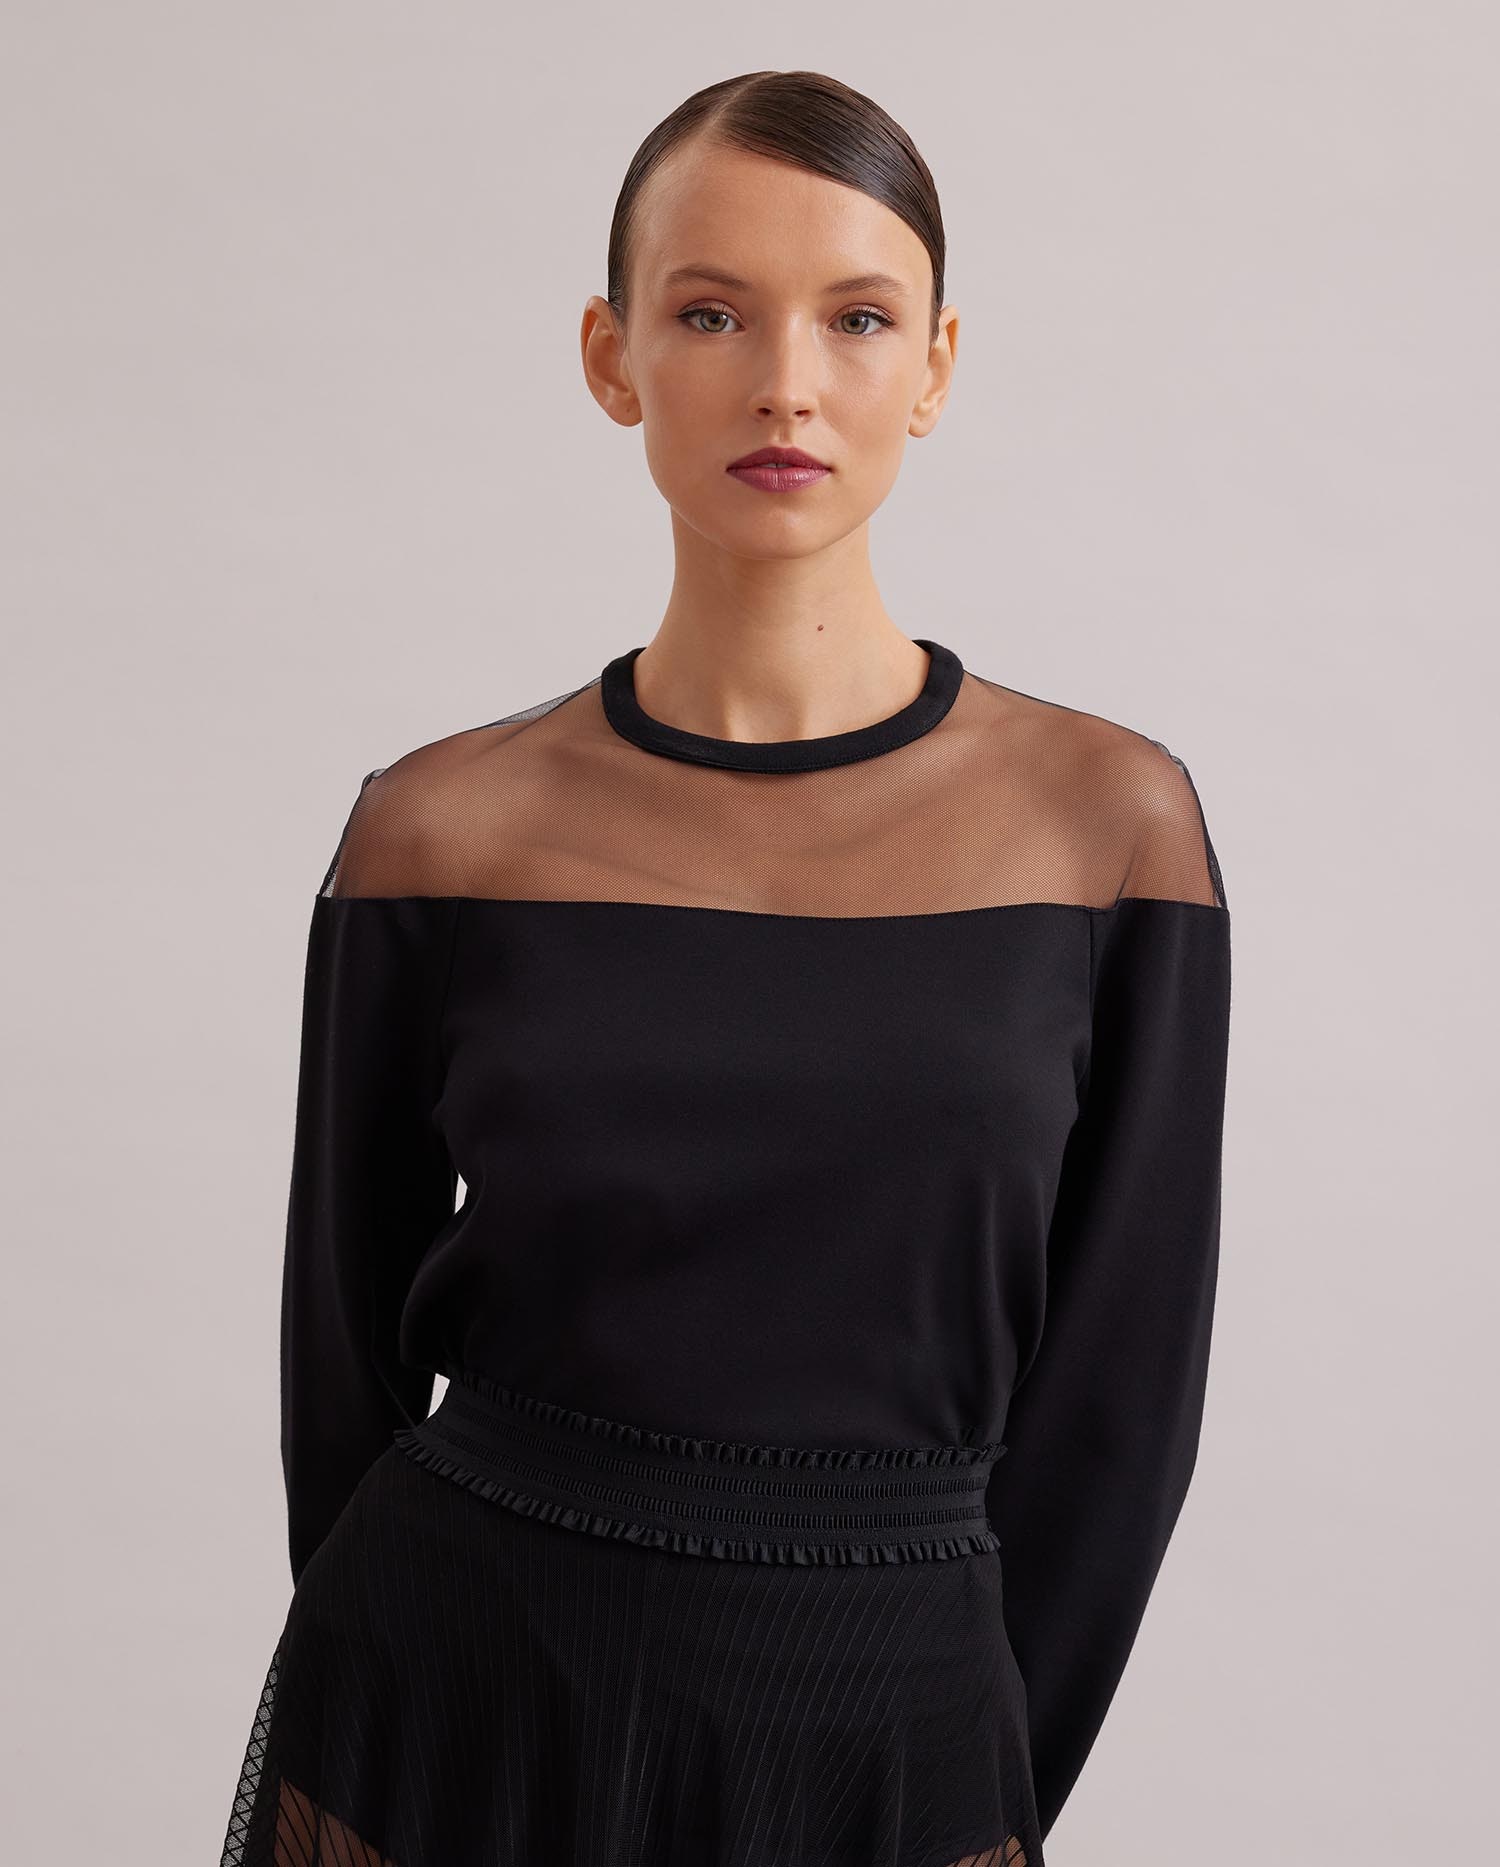 Discover The KALLY Black Long sleeve sheer tulle sweatshirt from ANNE FONTAINE